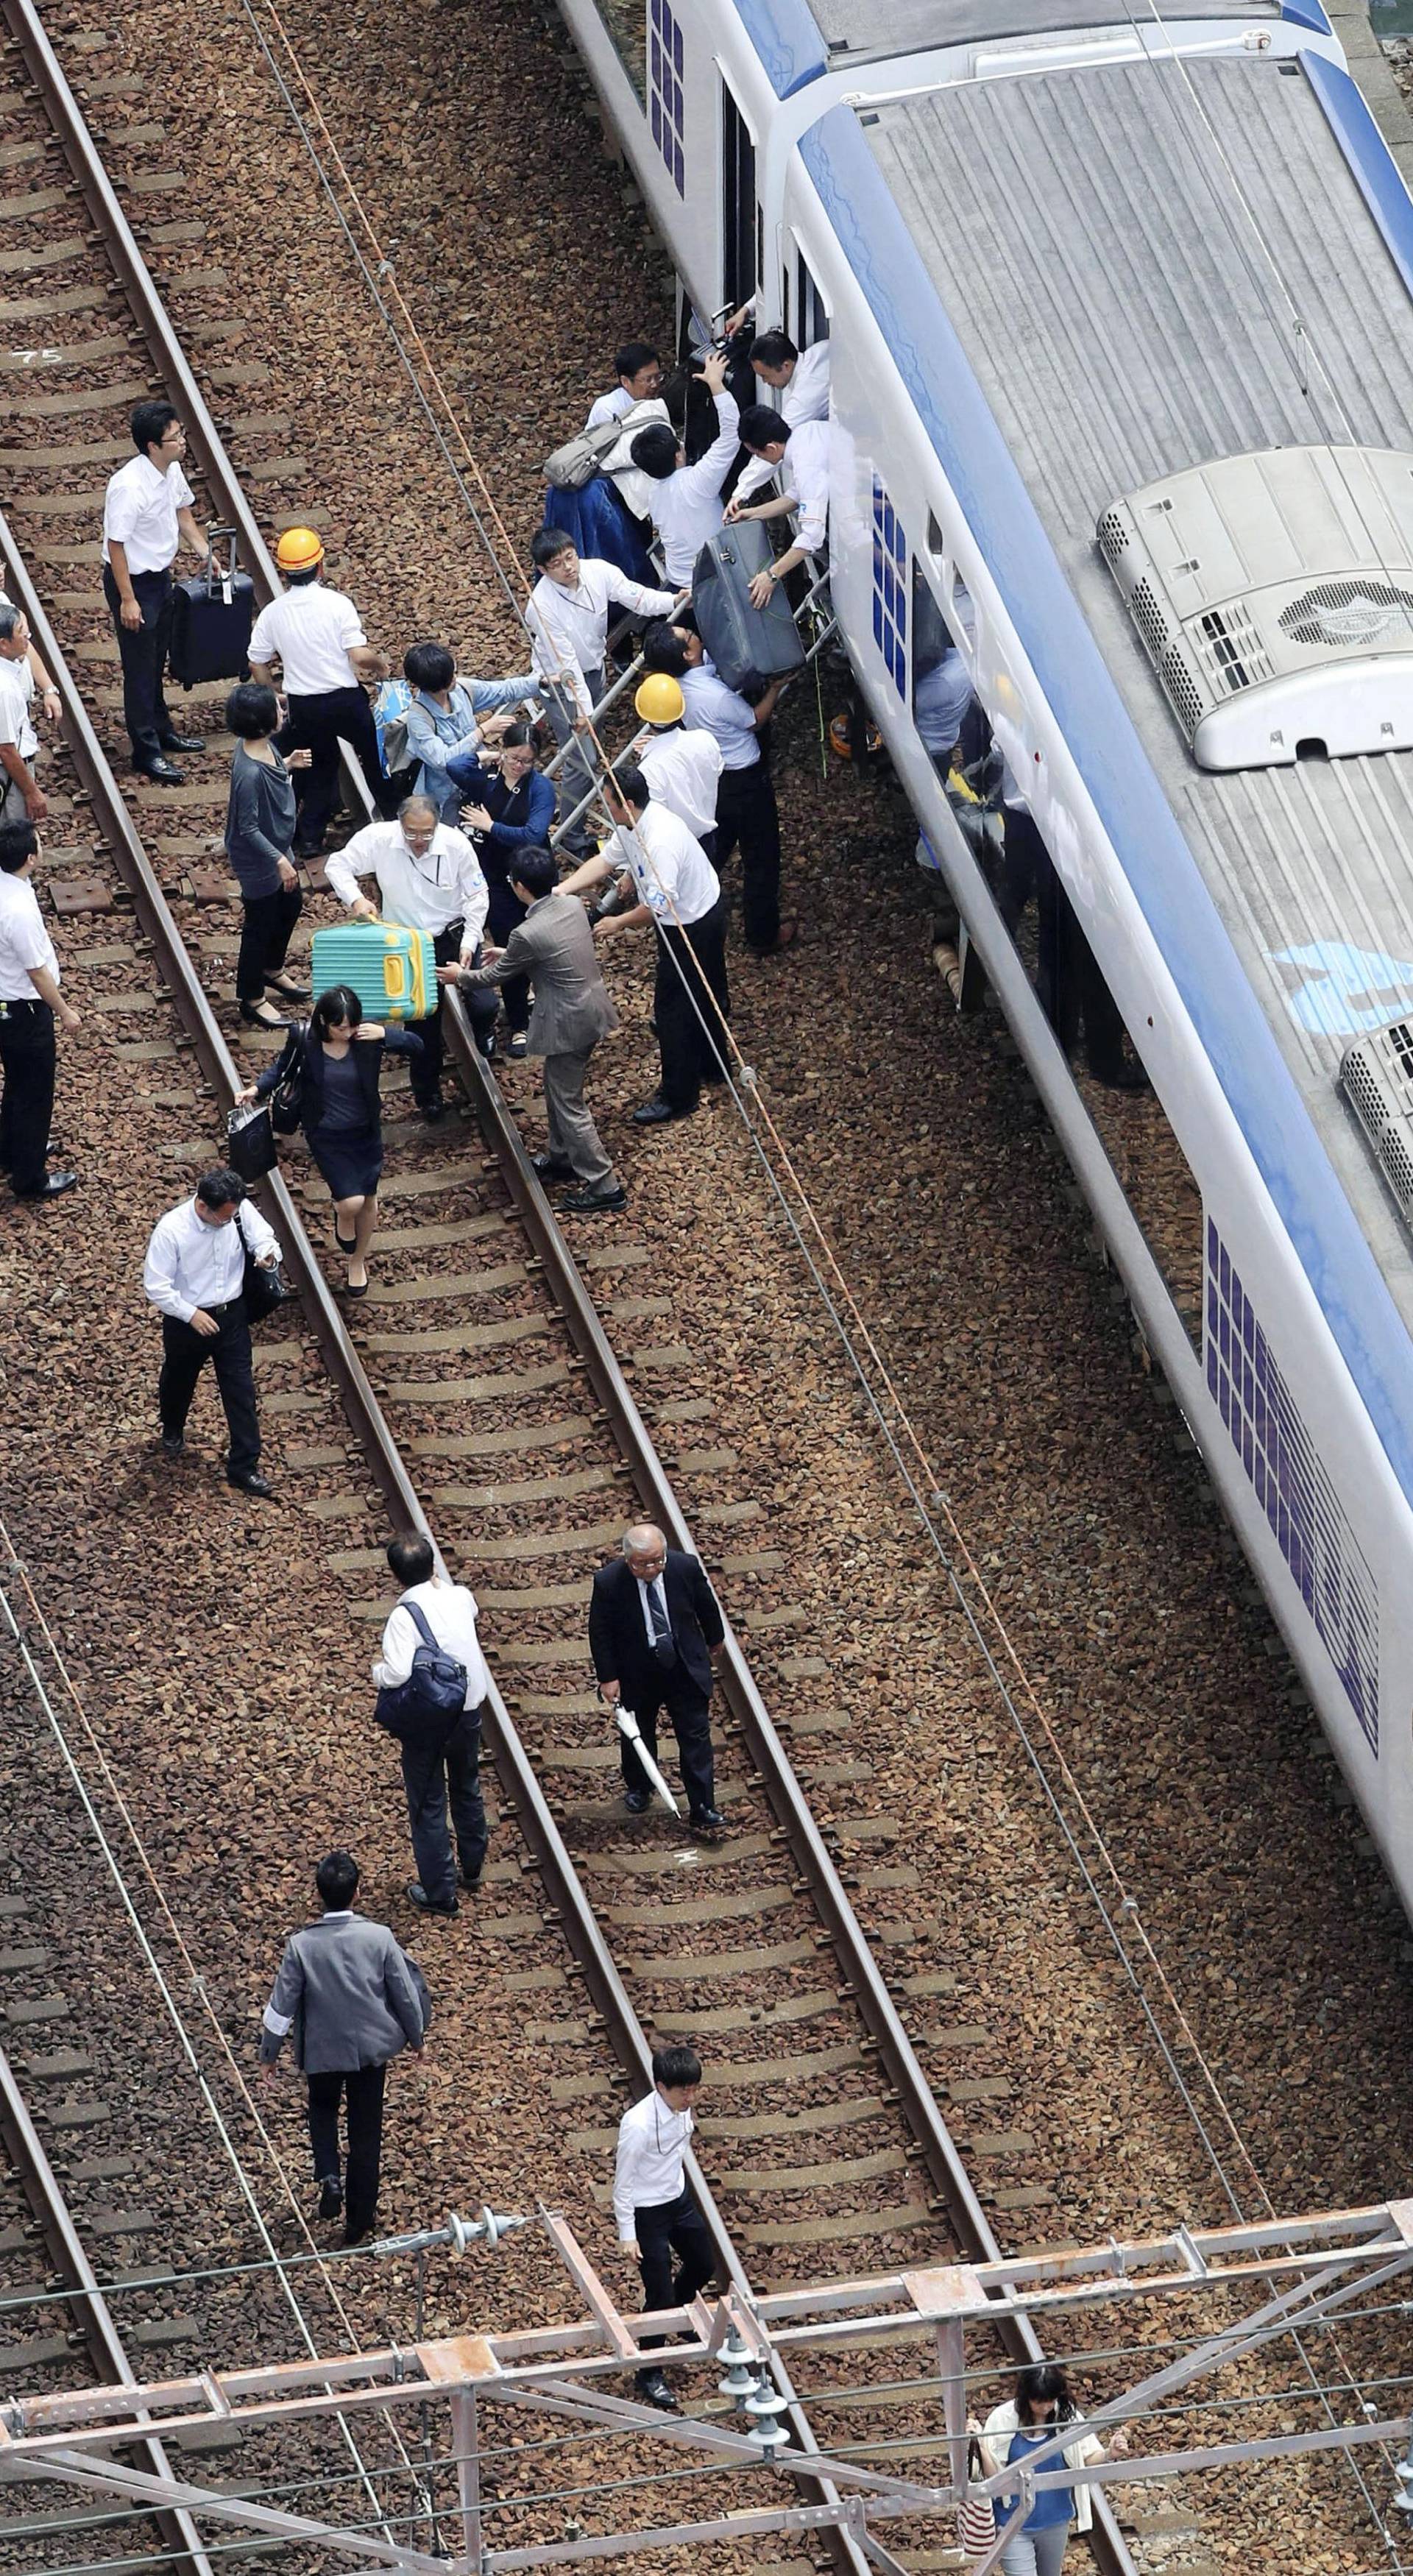 Passengers get off a train which operation was suspended after an earthquake in Takatsuki